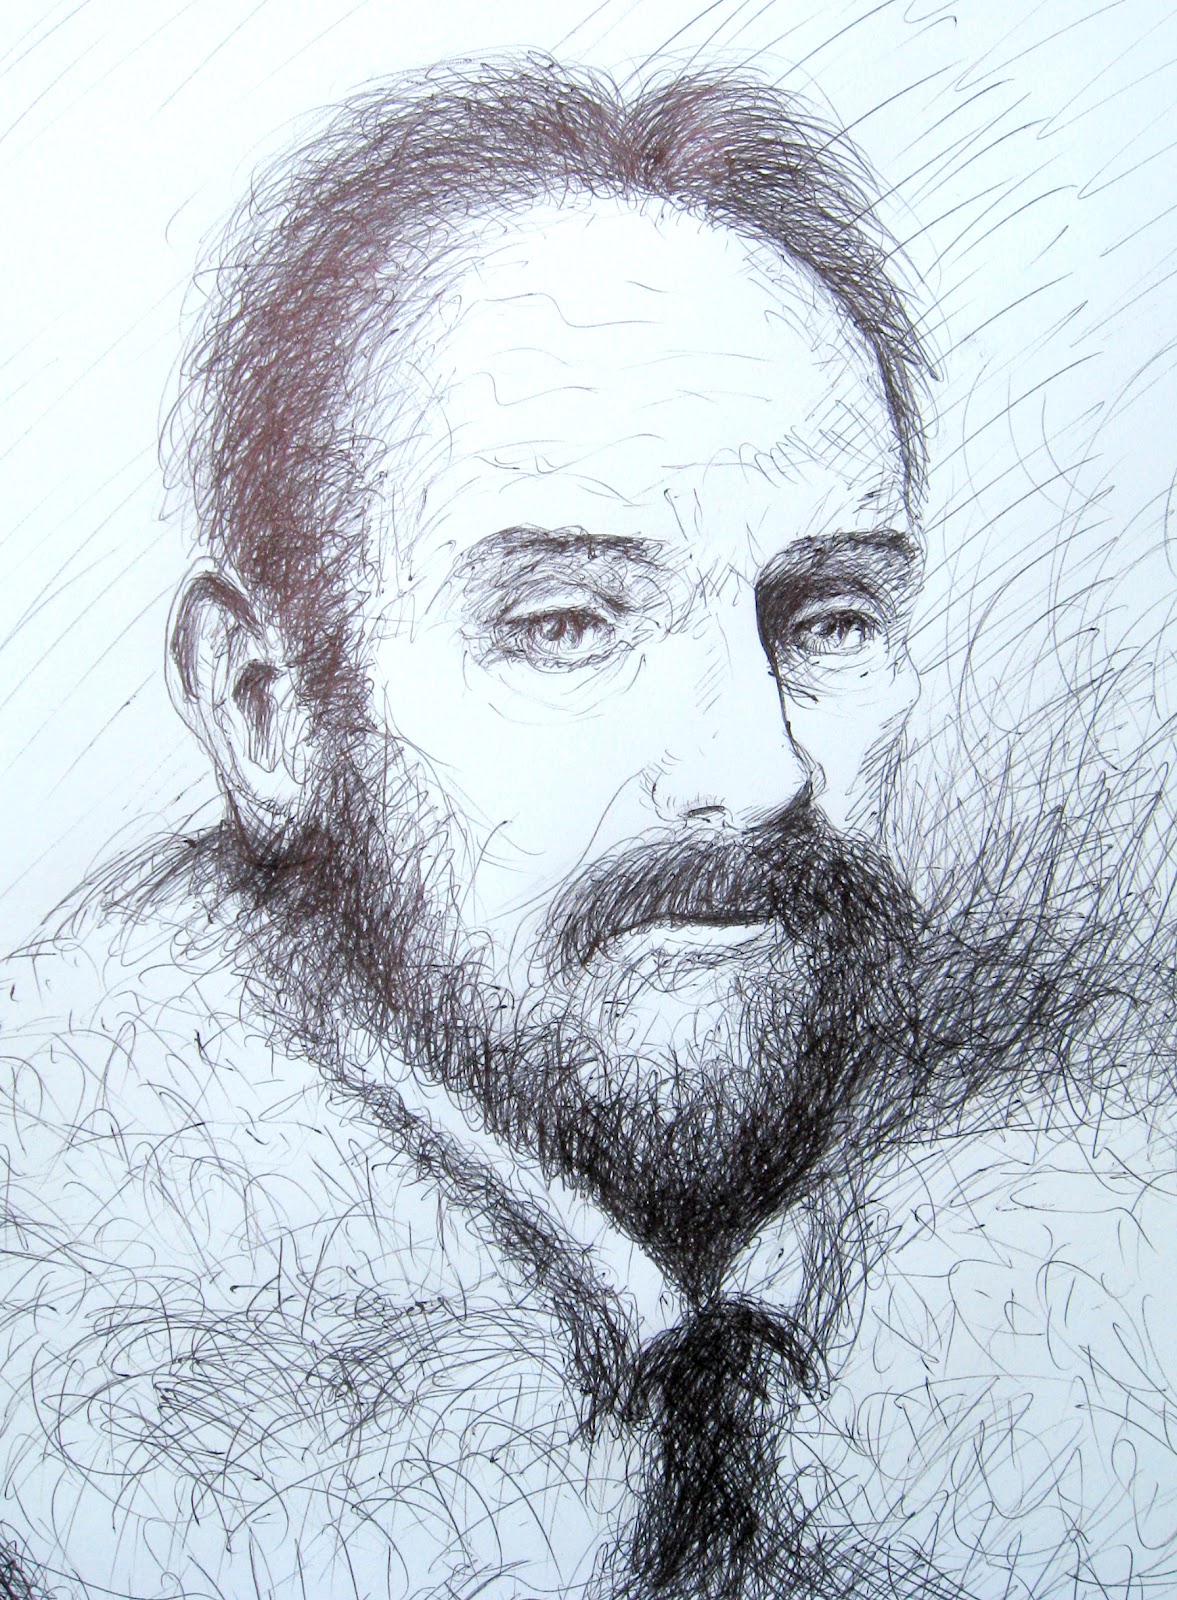 John Ackerson Art Portrait Pen Drawing and Sketch series continued